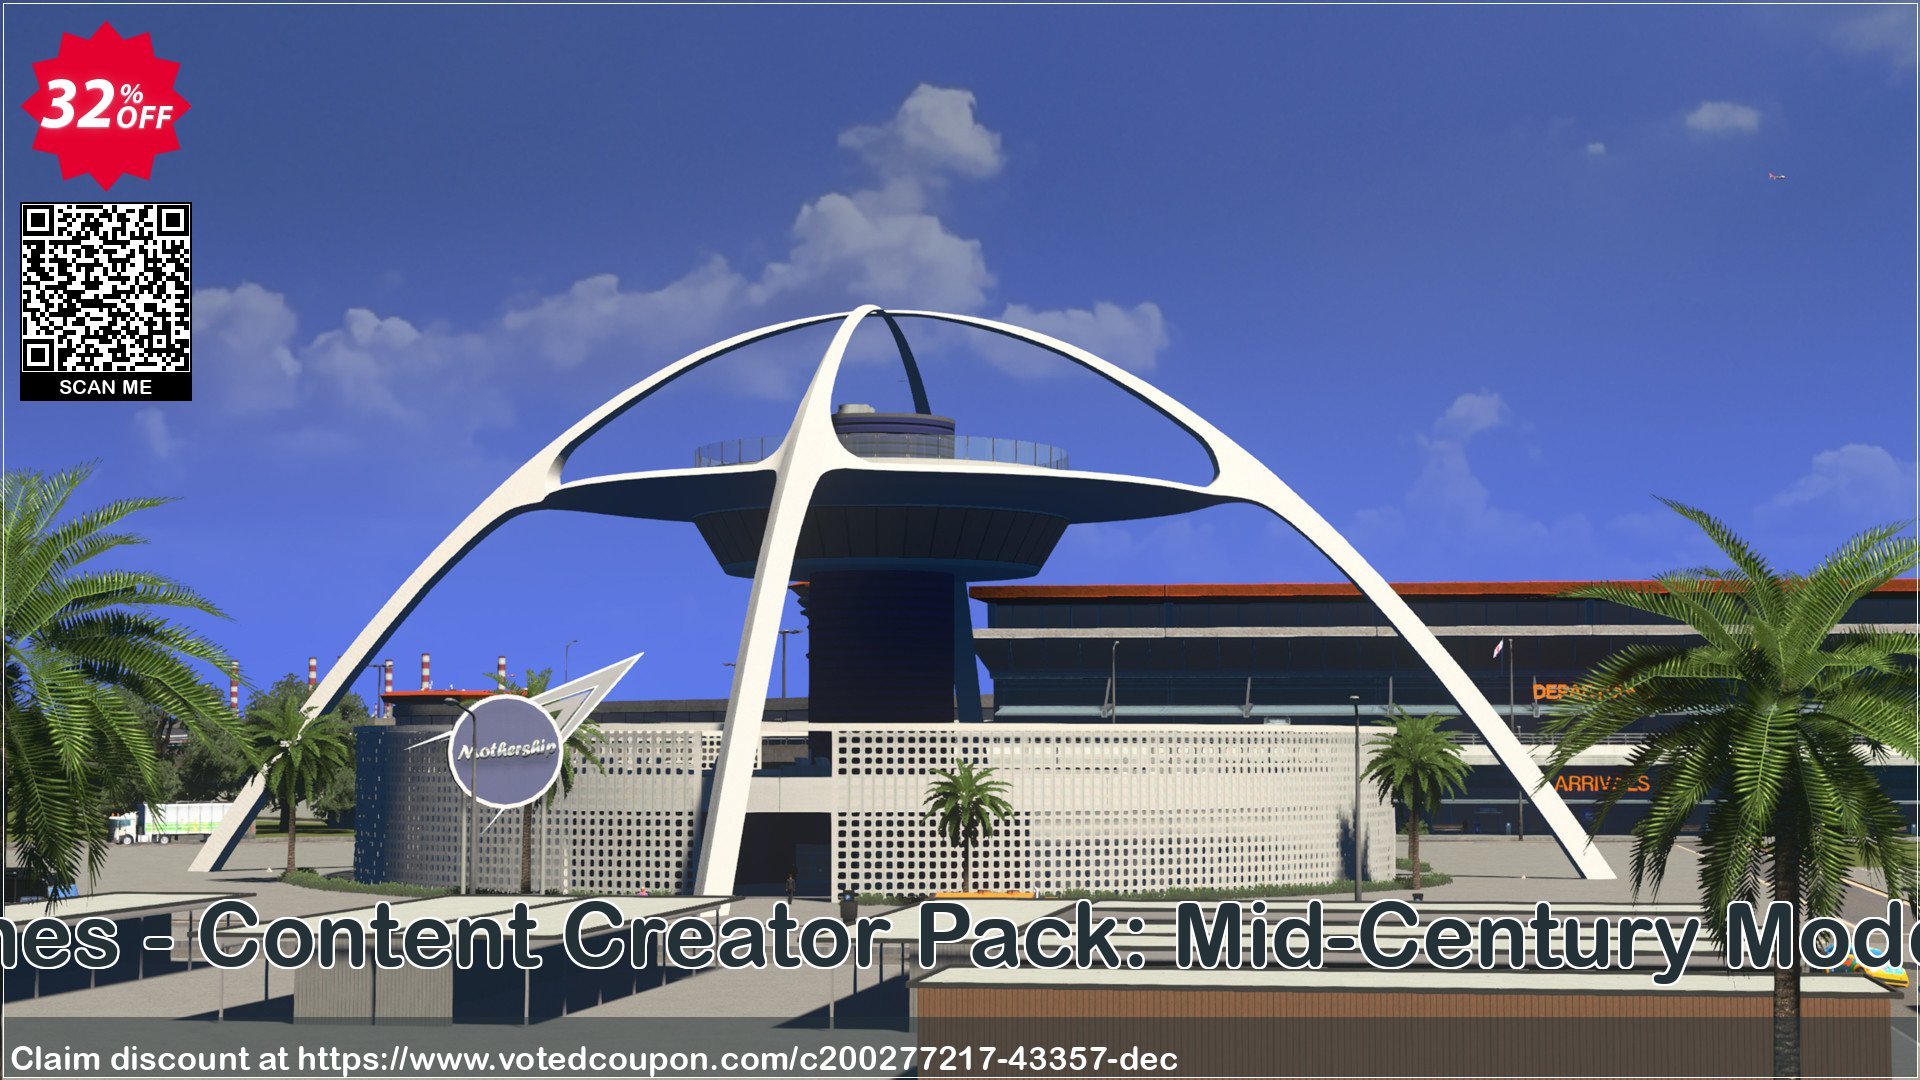 Cities: Skylines - Content Creator Pack: Mid-Century Modern PC - DLC Coupon Code May 2024, 32% OFF - VotedCoupon